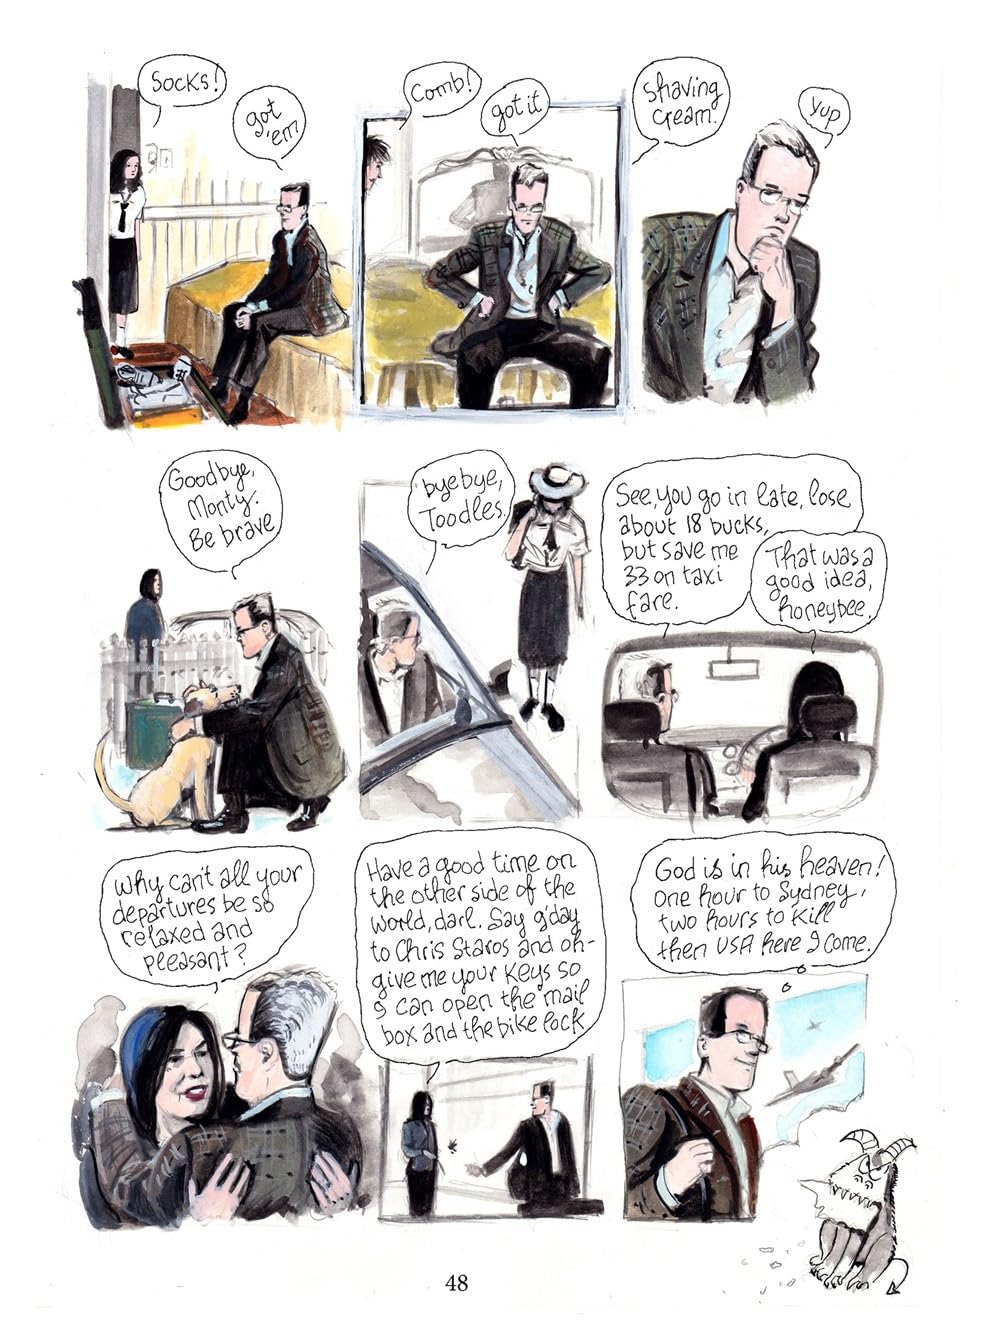 The Second Fake Death of Eddie Campbell & The Fate of the Artist